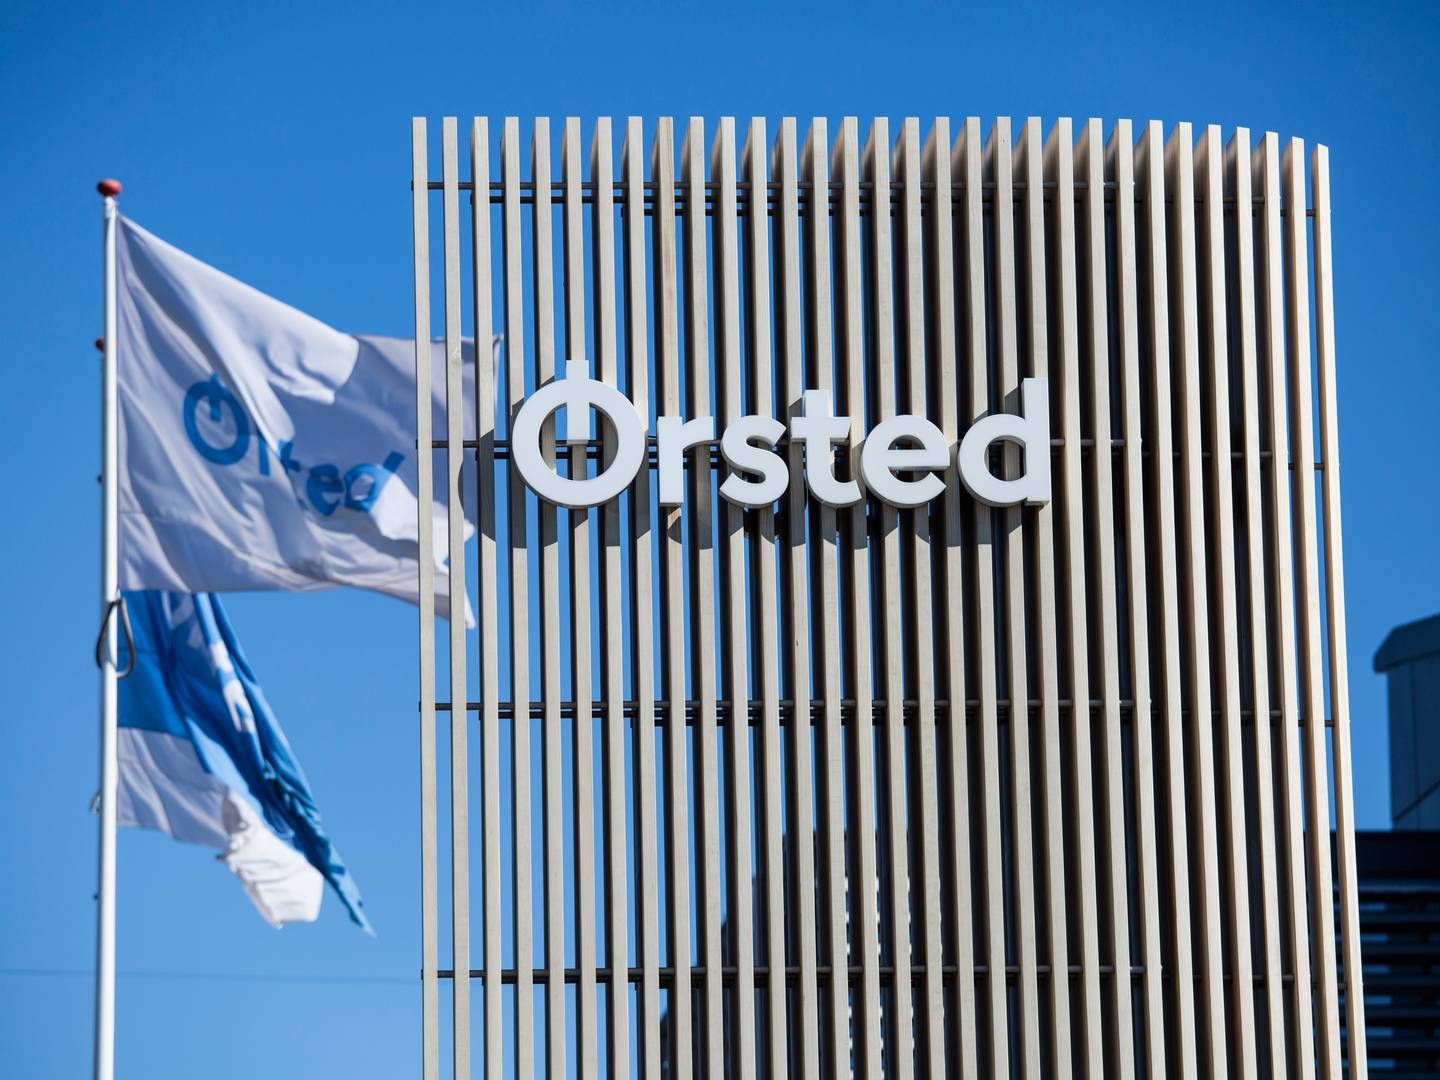 The Danish energy company expects to collect advantaging tax credits in the US in the future. | Foto: Ørsted